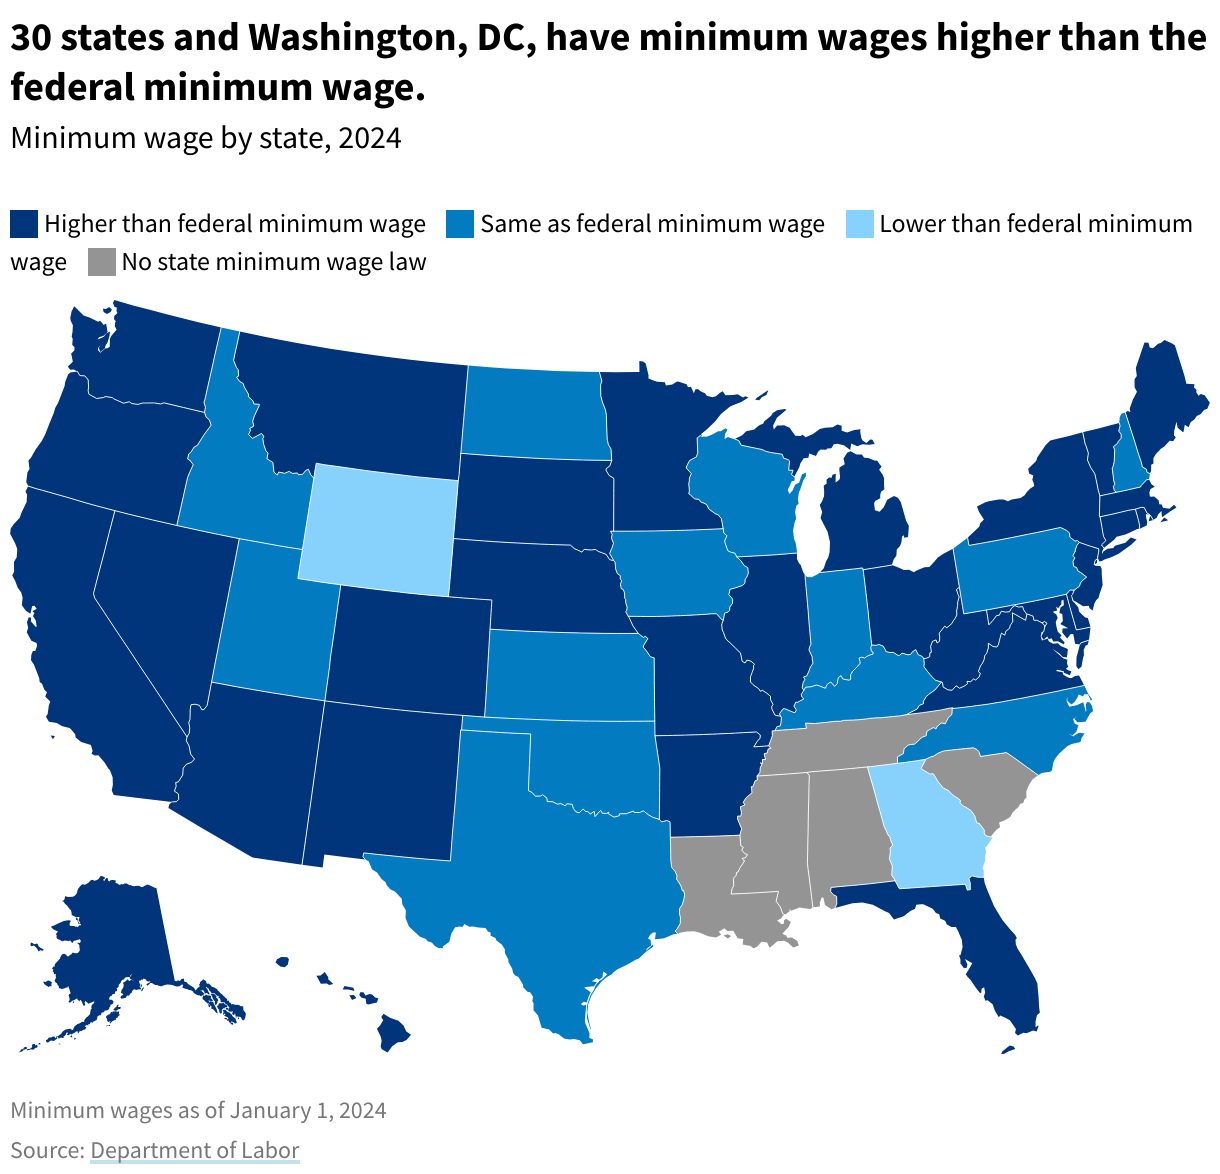 A categorical heatmap of the United States showing which states have minimum wages above, at, or below the federal minimum wage. It also shows which states do not have minimum wage laws. 